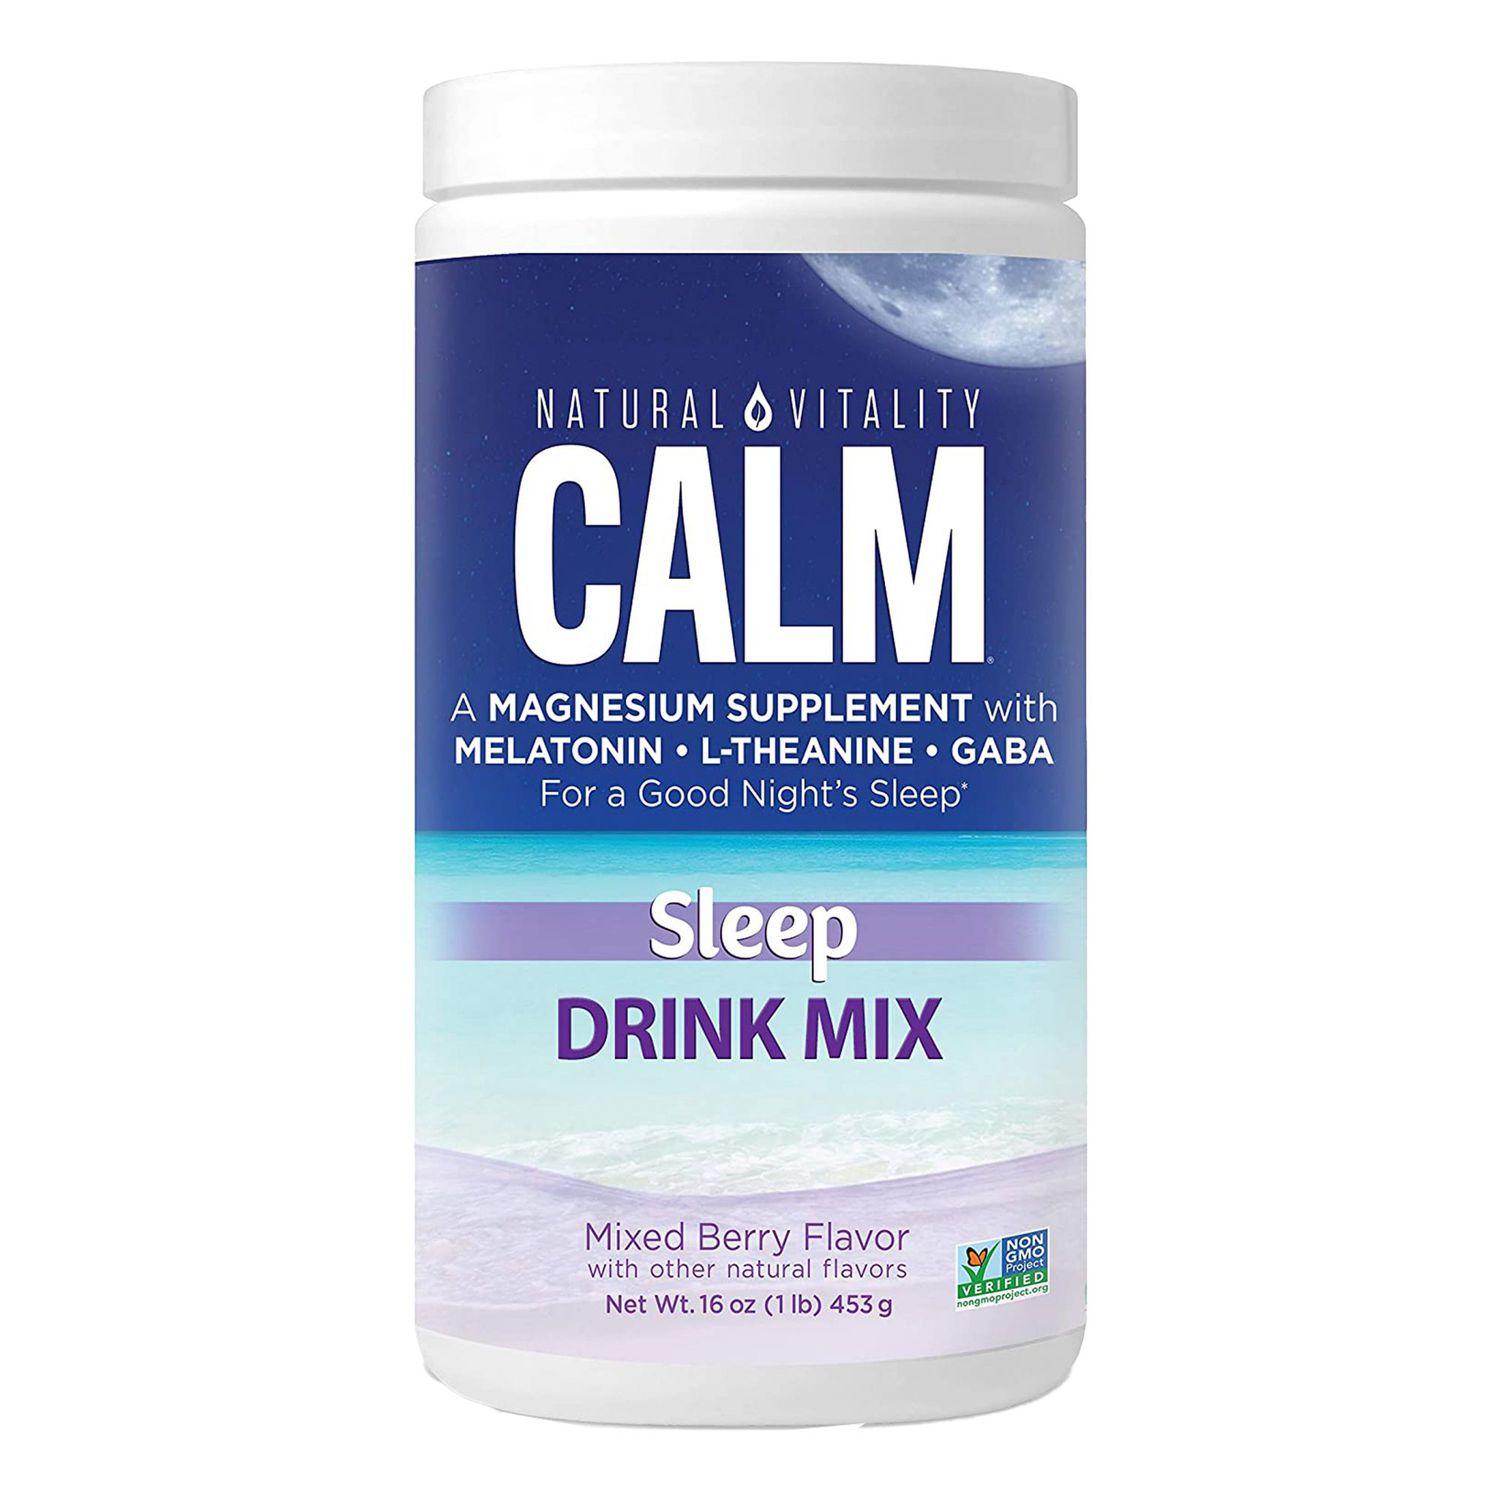 Natural-Vitality-Calm-Magnesium-Supplement-Best-Natural-Sleep-Aids-Products